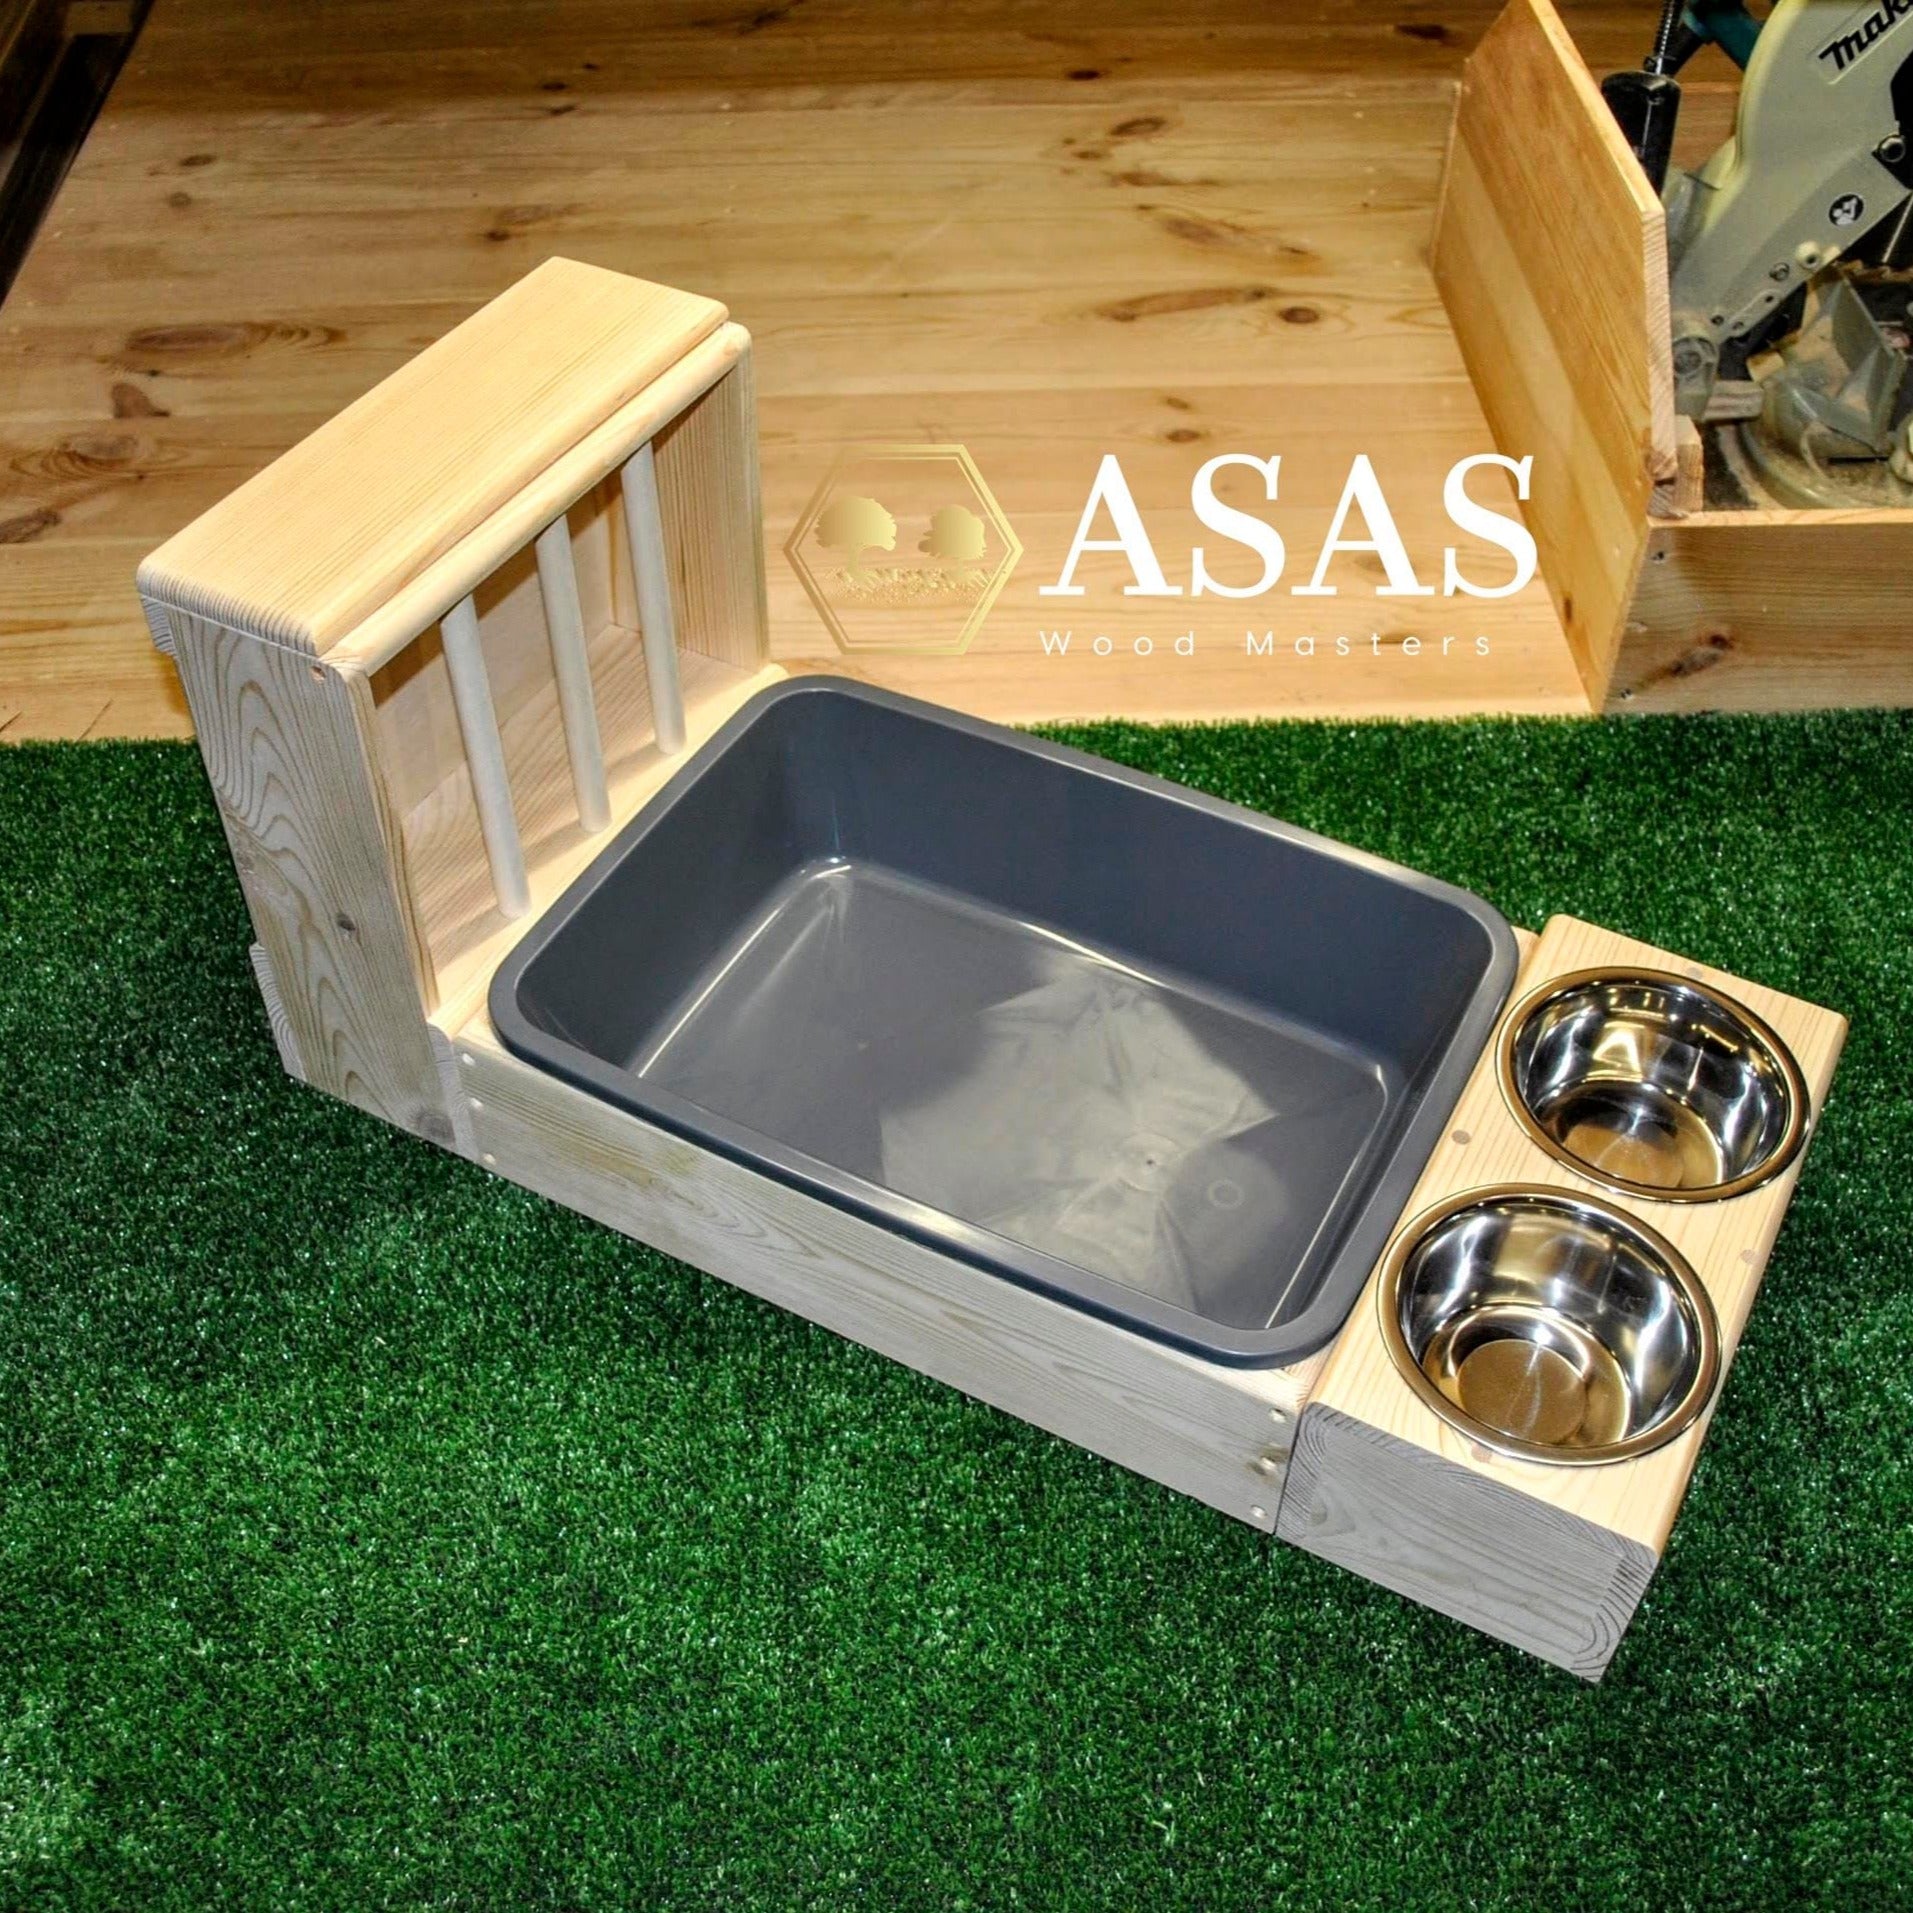 rabbit litter box, bunny hay feeder and metal food and drink bowl station combo